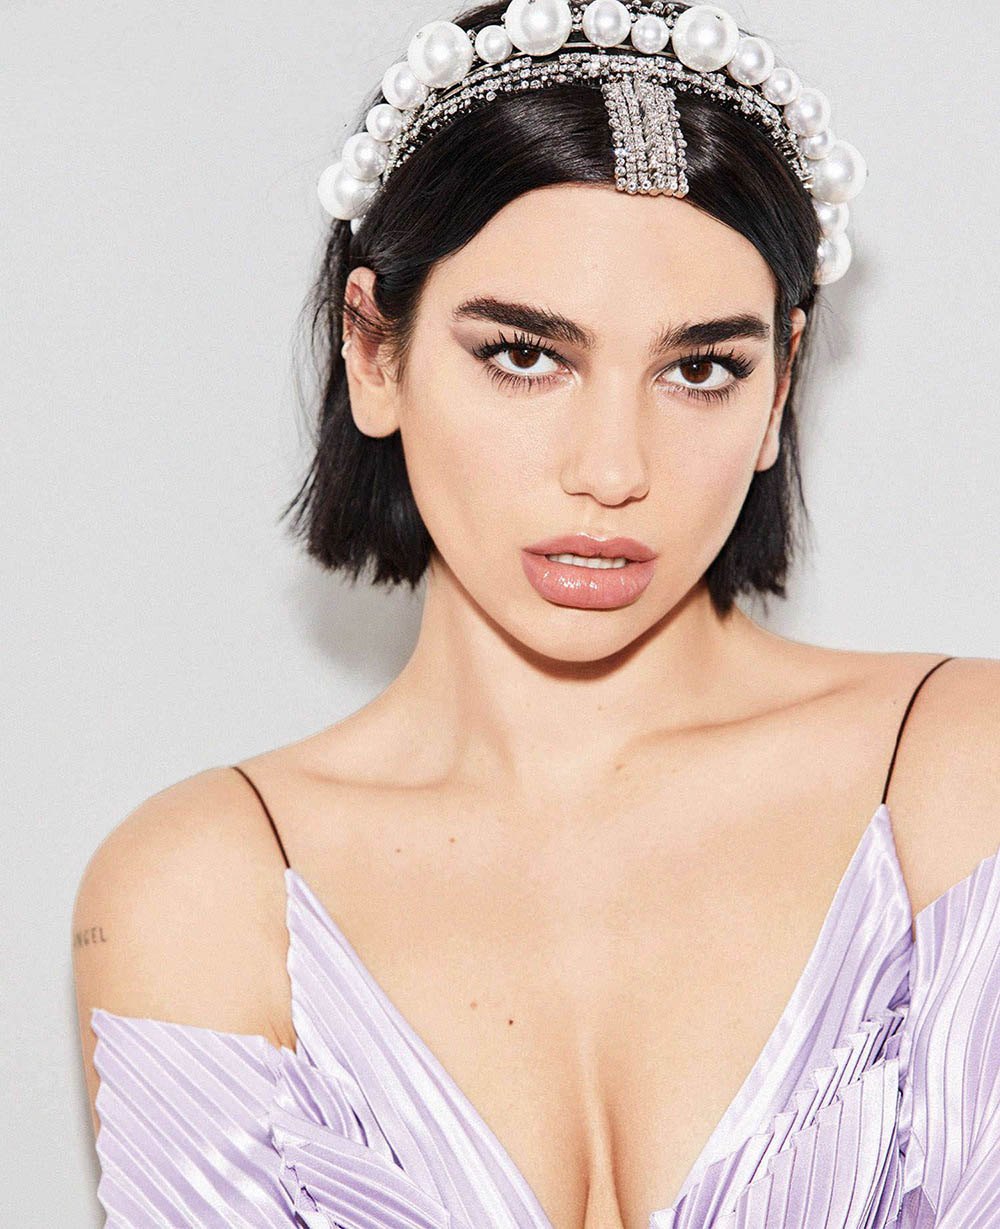 Dua Lipa covers Elle US May 2019 by Carin Backoff